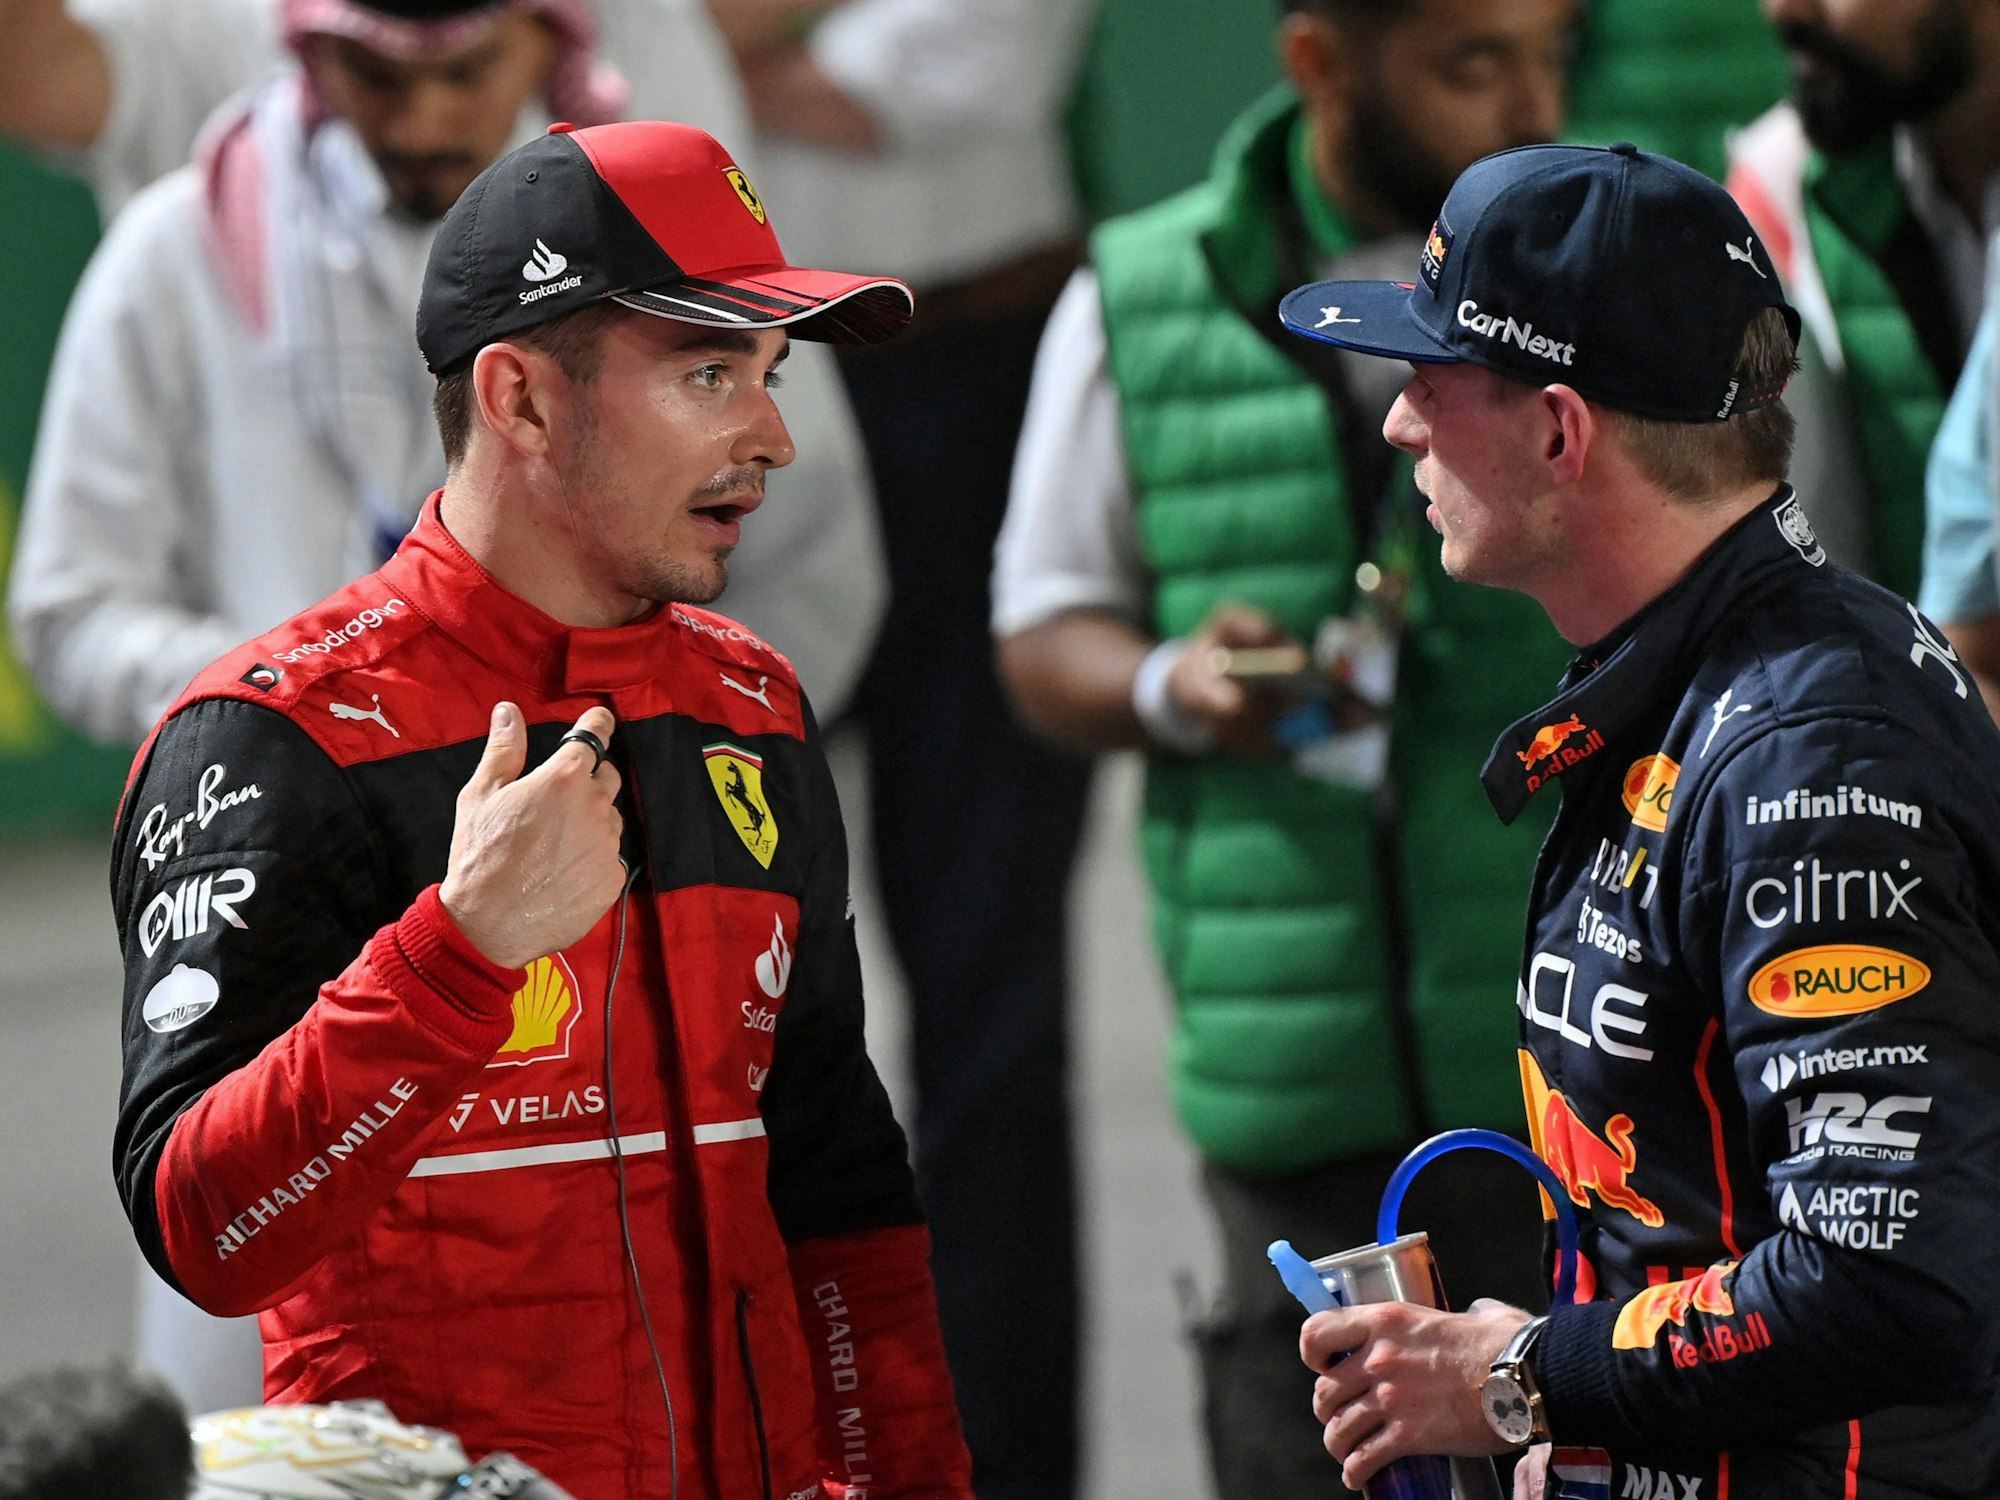 Ferrari's Monegasque driver Charles Leclerc (L) chats with Red Bull's Dutch driver Max Verstappen (R) after the 2022 Saudi Arabia Formula One Grand Prix at the Jeddah Corniche Circuit on March 27, 2022. (Photo by ANDREJ ISAKOVIC / AFP)